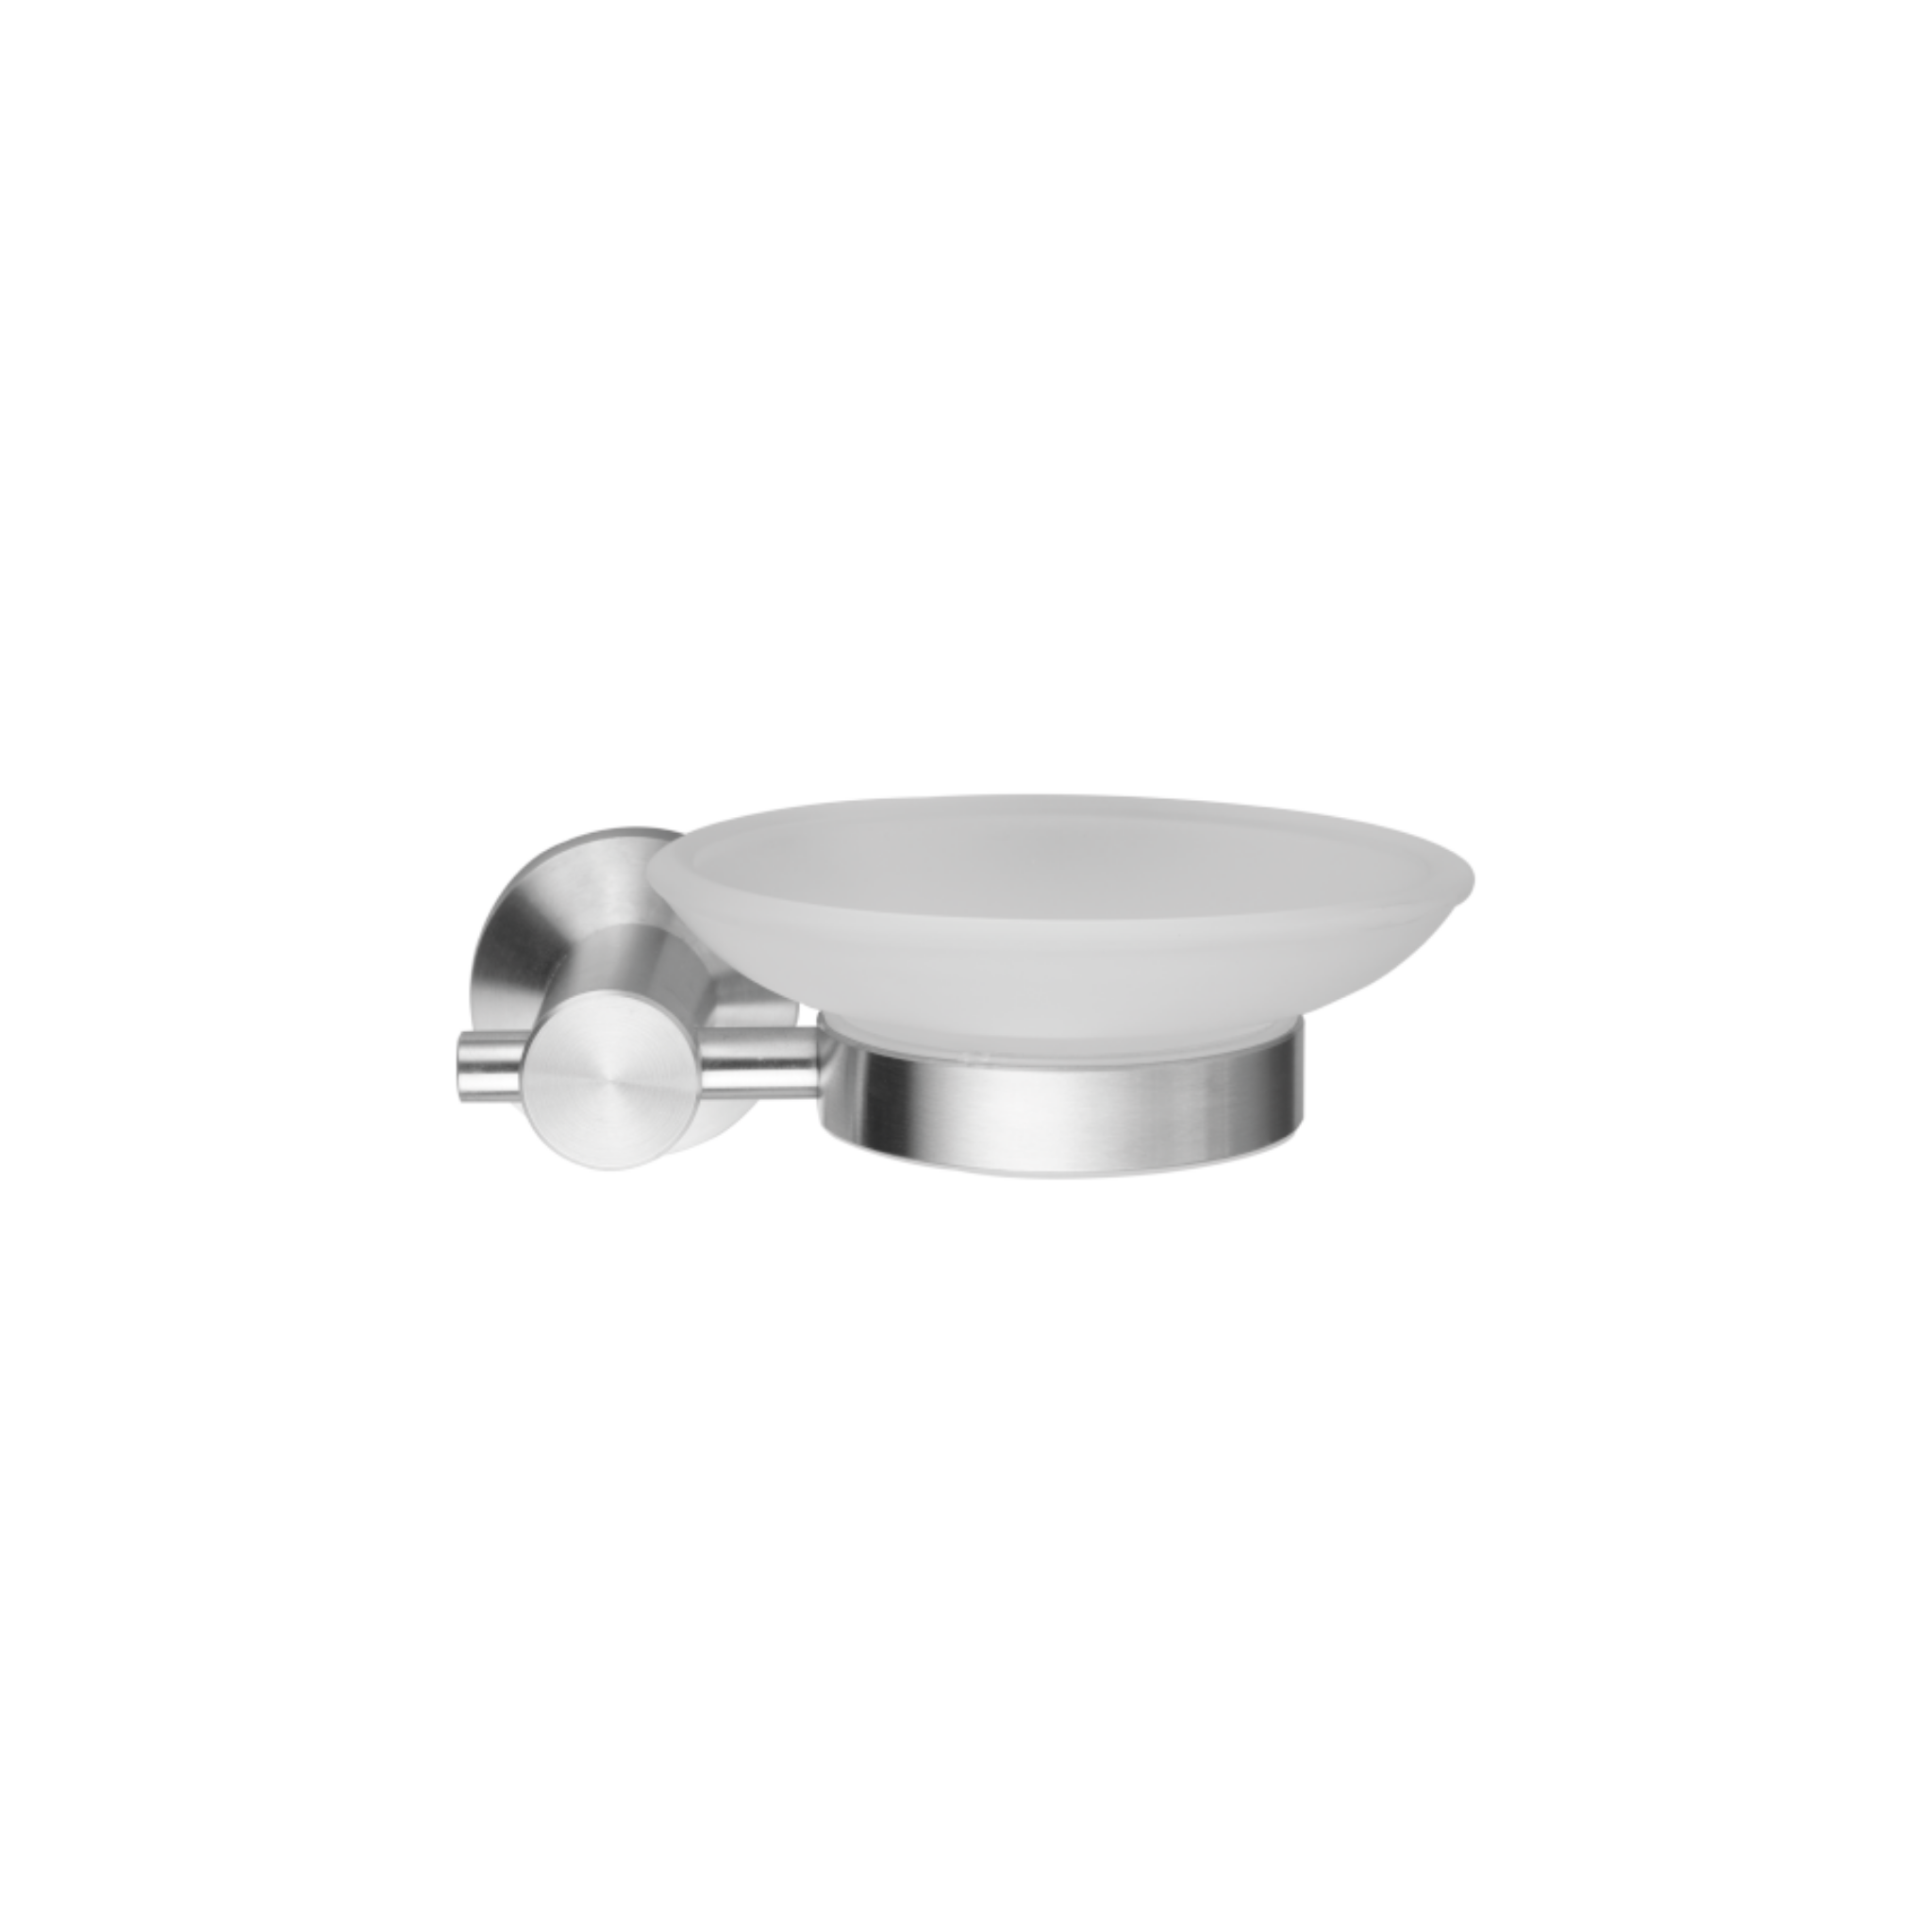 QS1511/PSS, Holder, Soap Dish, Polished Stainless Steel, QS